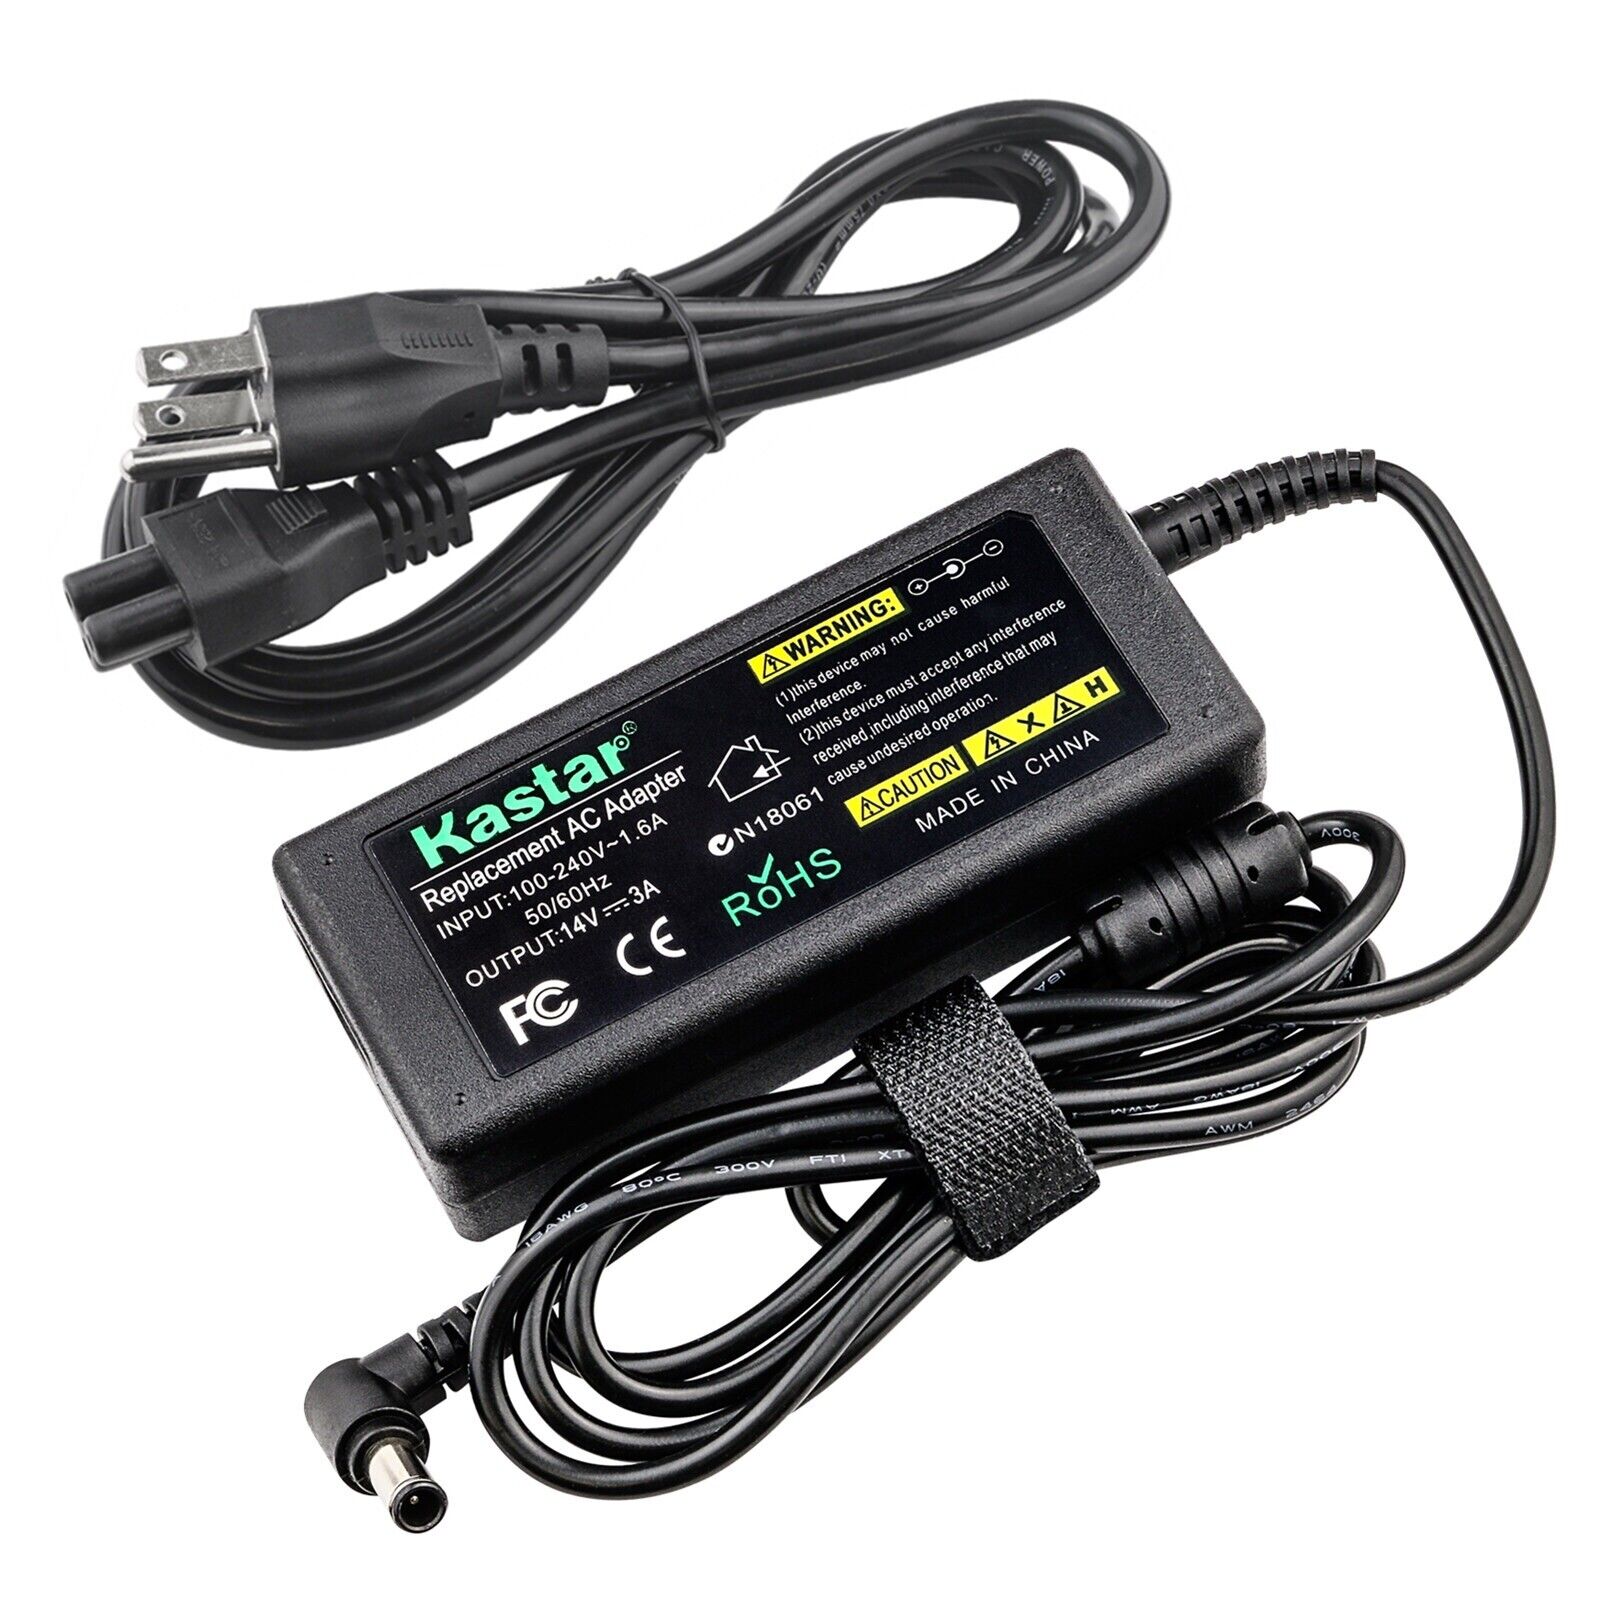 Kastar 14V 3A 42W AC Power Adapter Charger For Samsung AD-6314N T C BN44-00399B